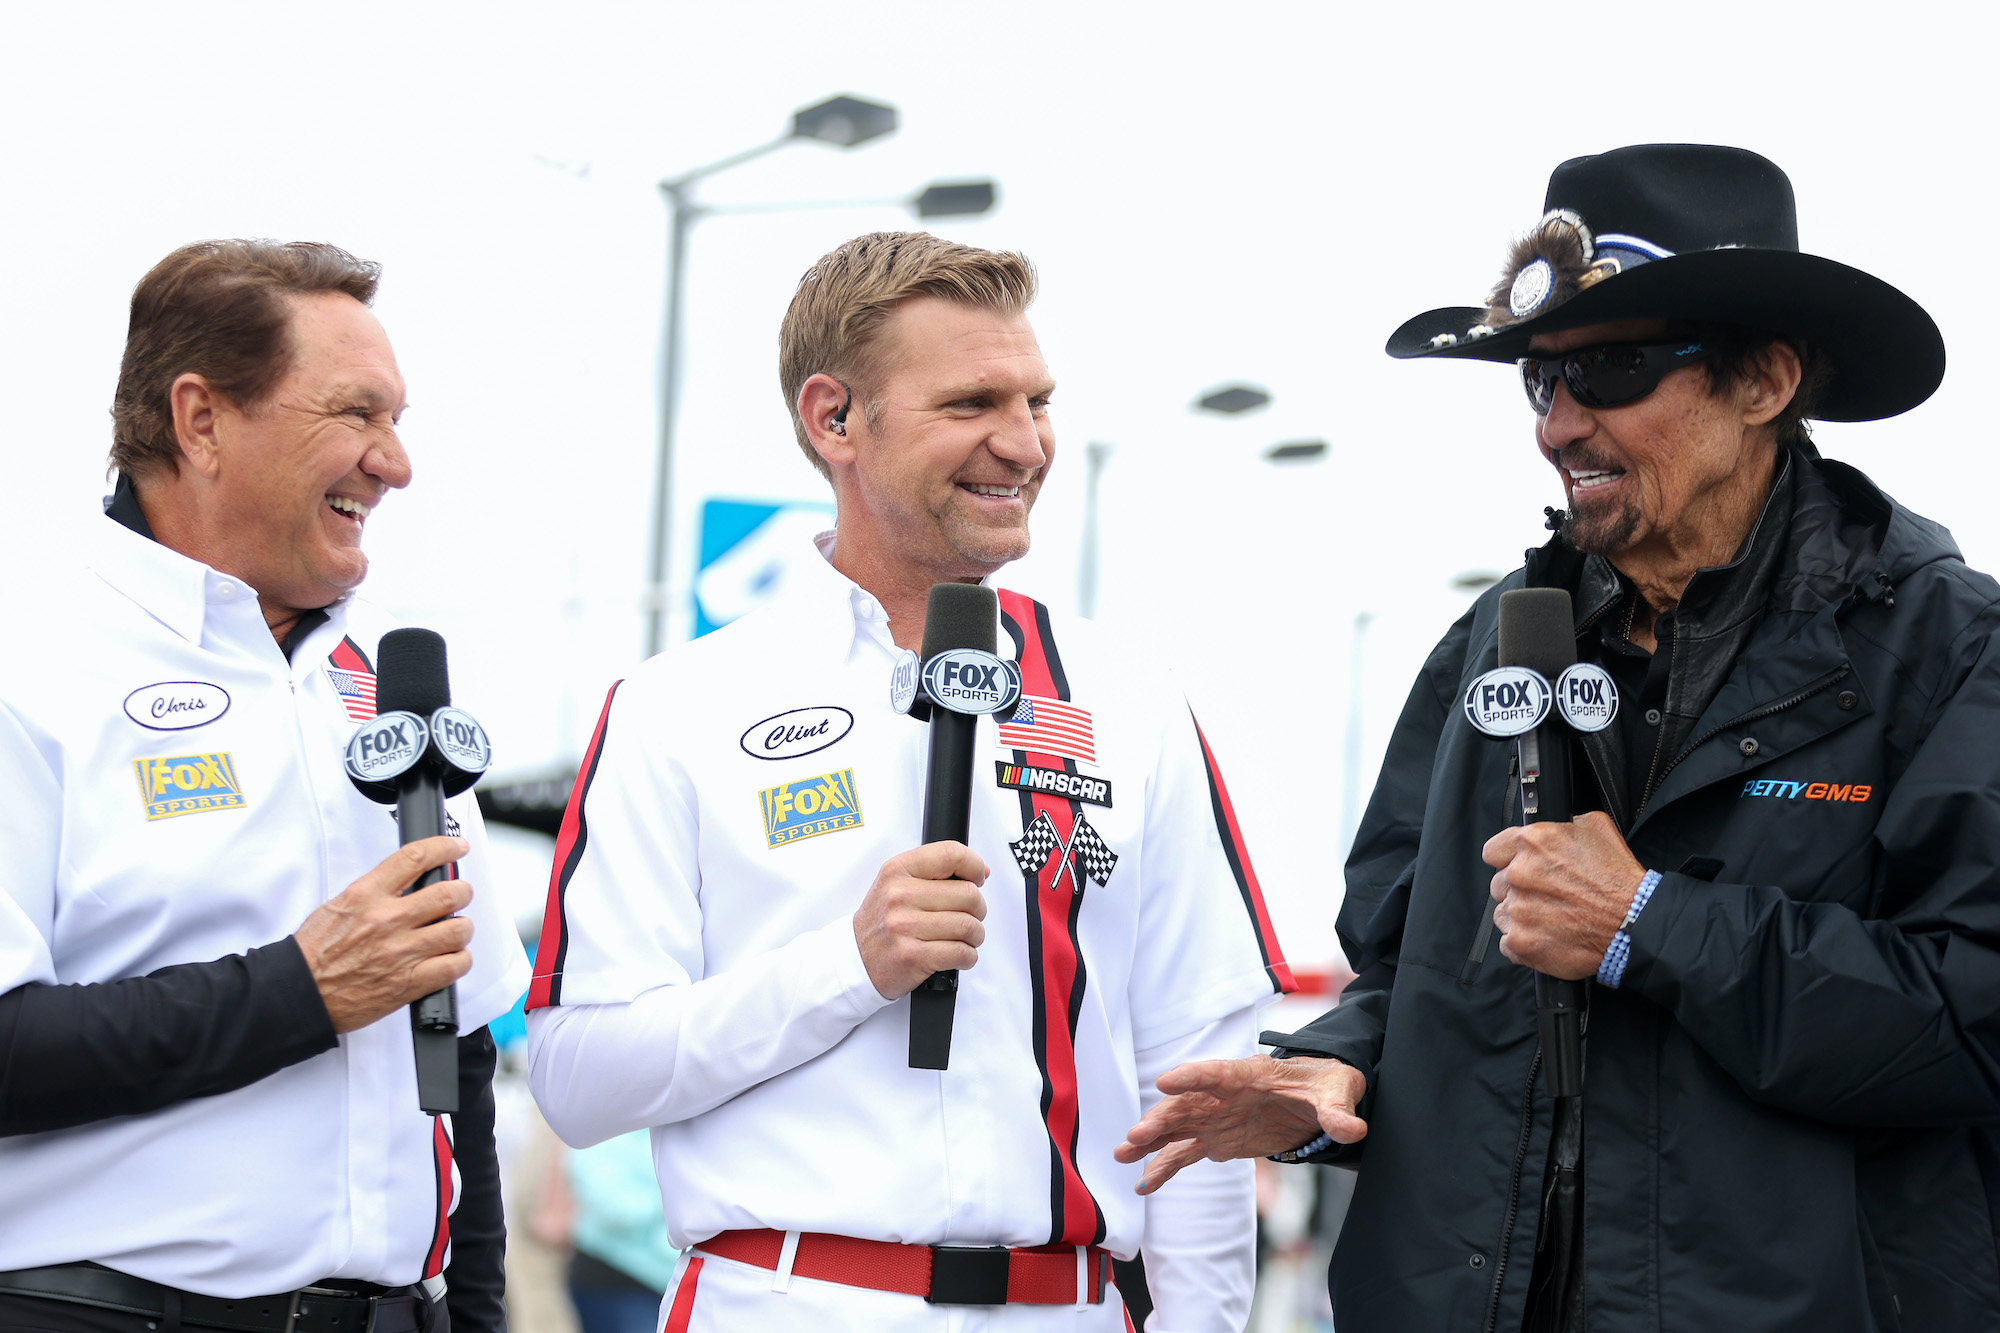 Clint Bowyer talks with Chris Myers and Richard Petty